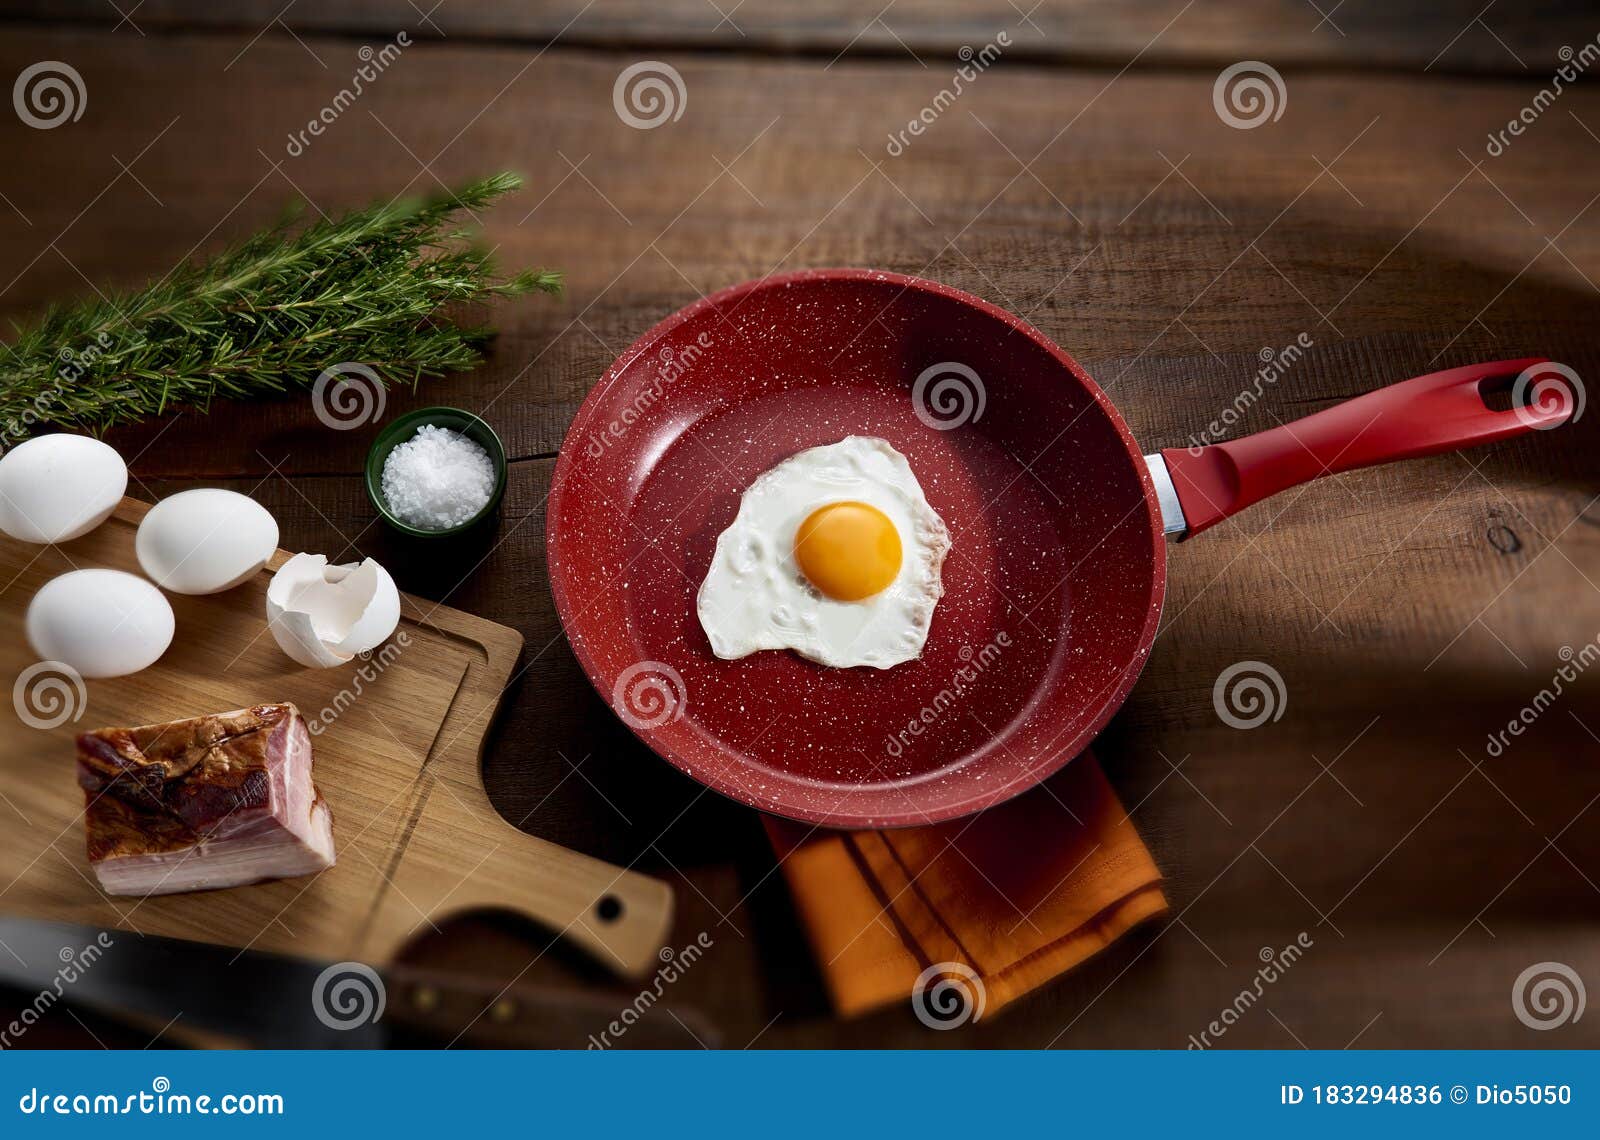 fried egg in red frying pan